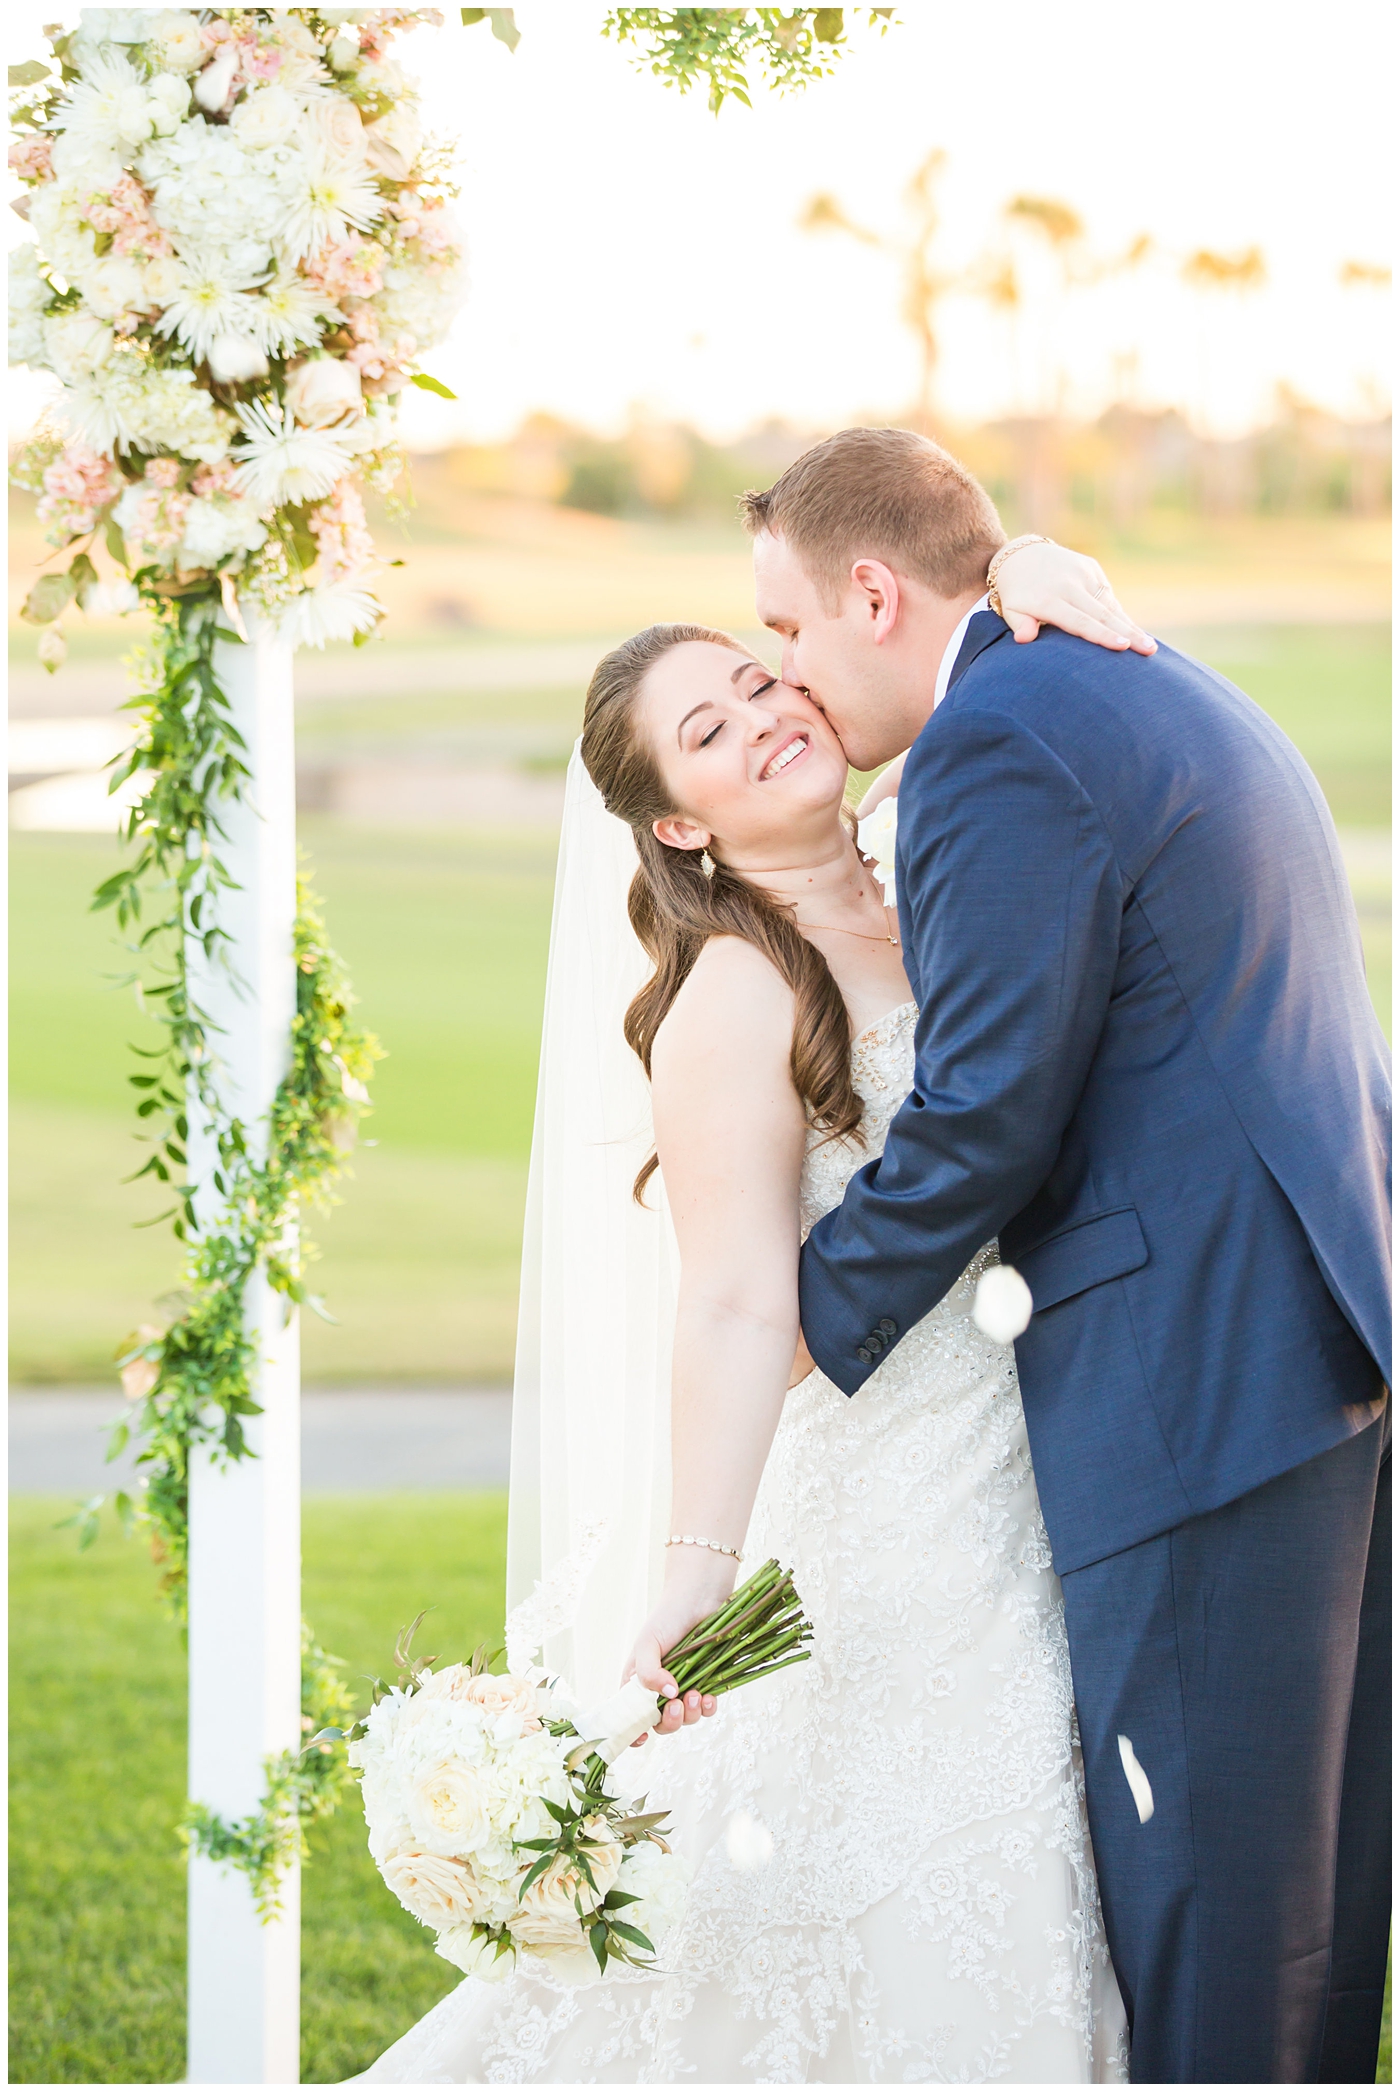 bride in lillian lottie couture wedding dress with white rose bouquet and groom in navy blue suit from men's warehouse bride and groom wedding portrait under arch on golf course